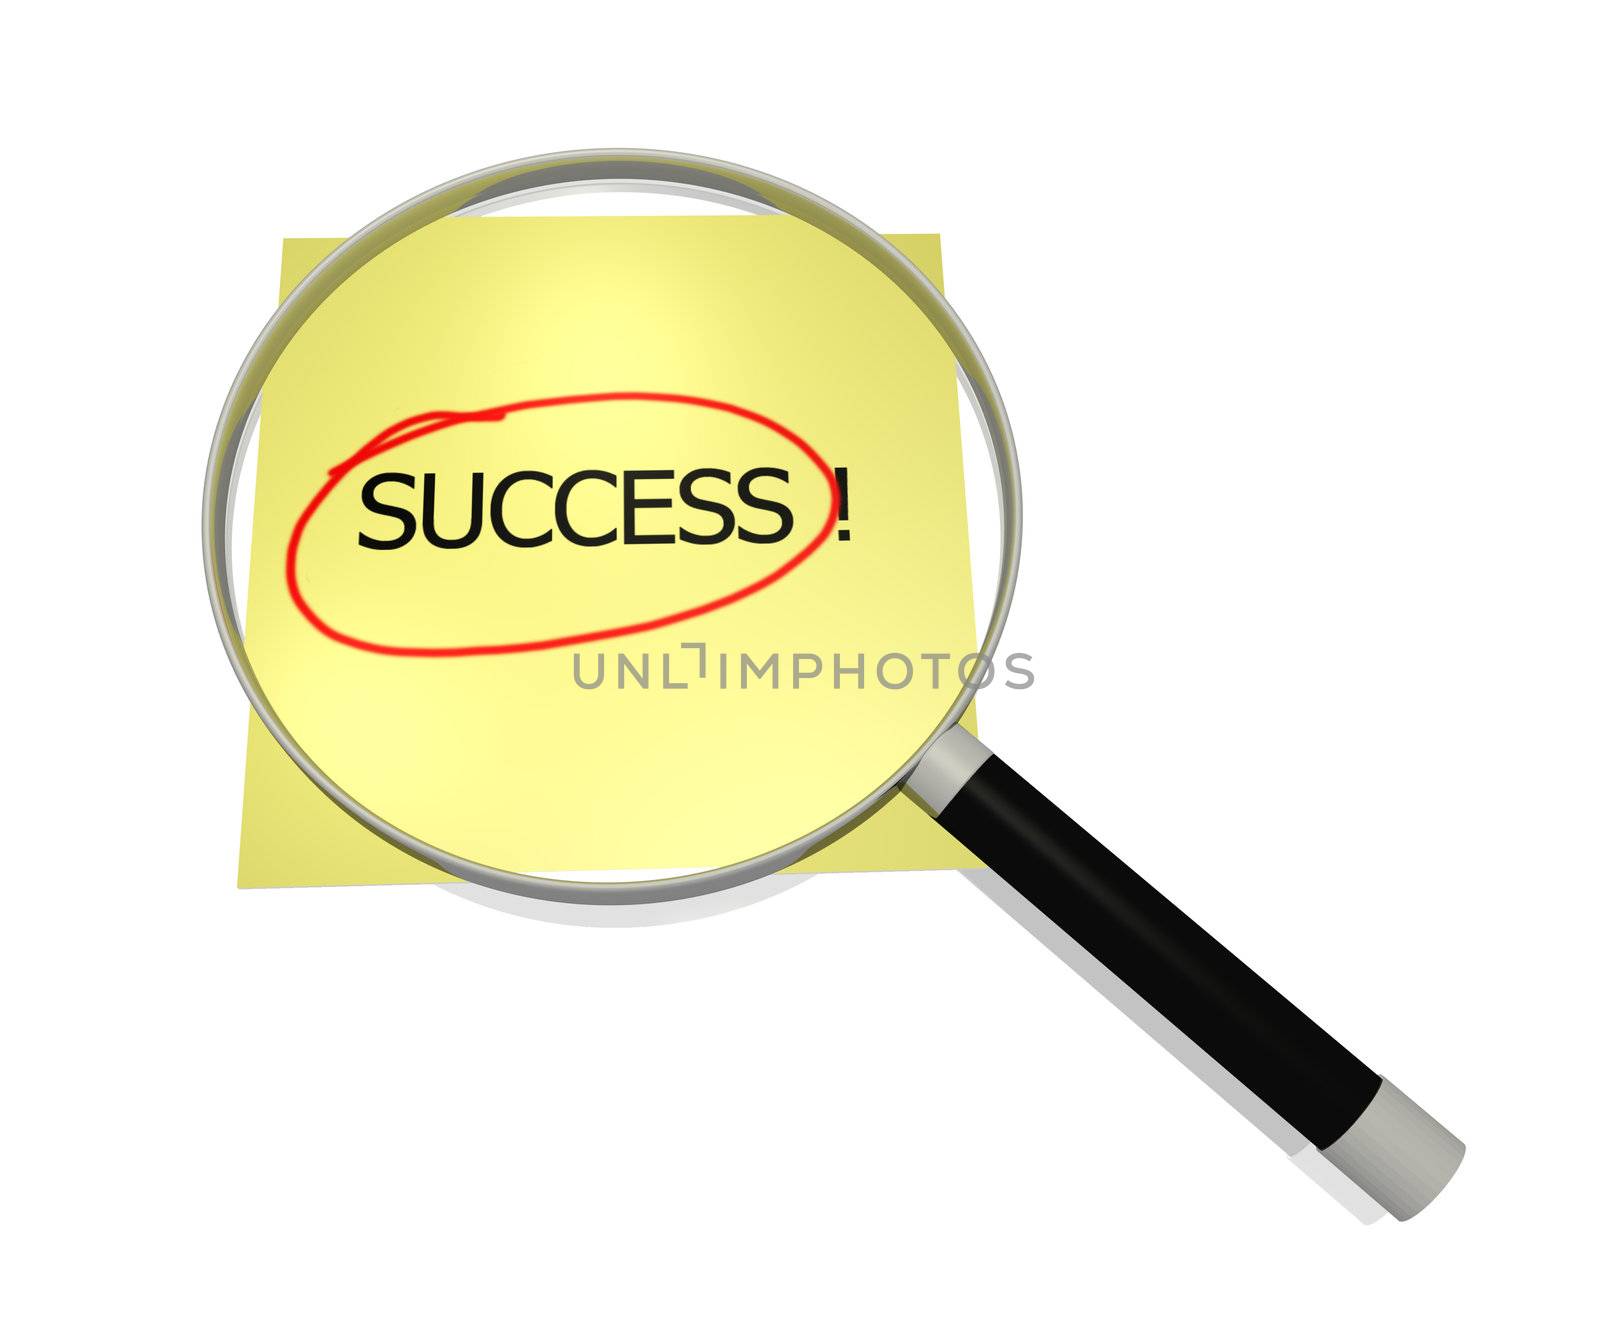 Image of a magnifying glass focusing on the word "Success".